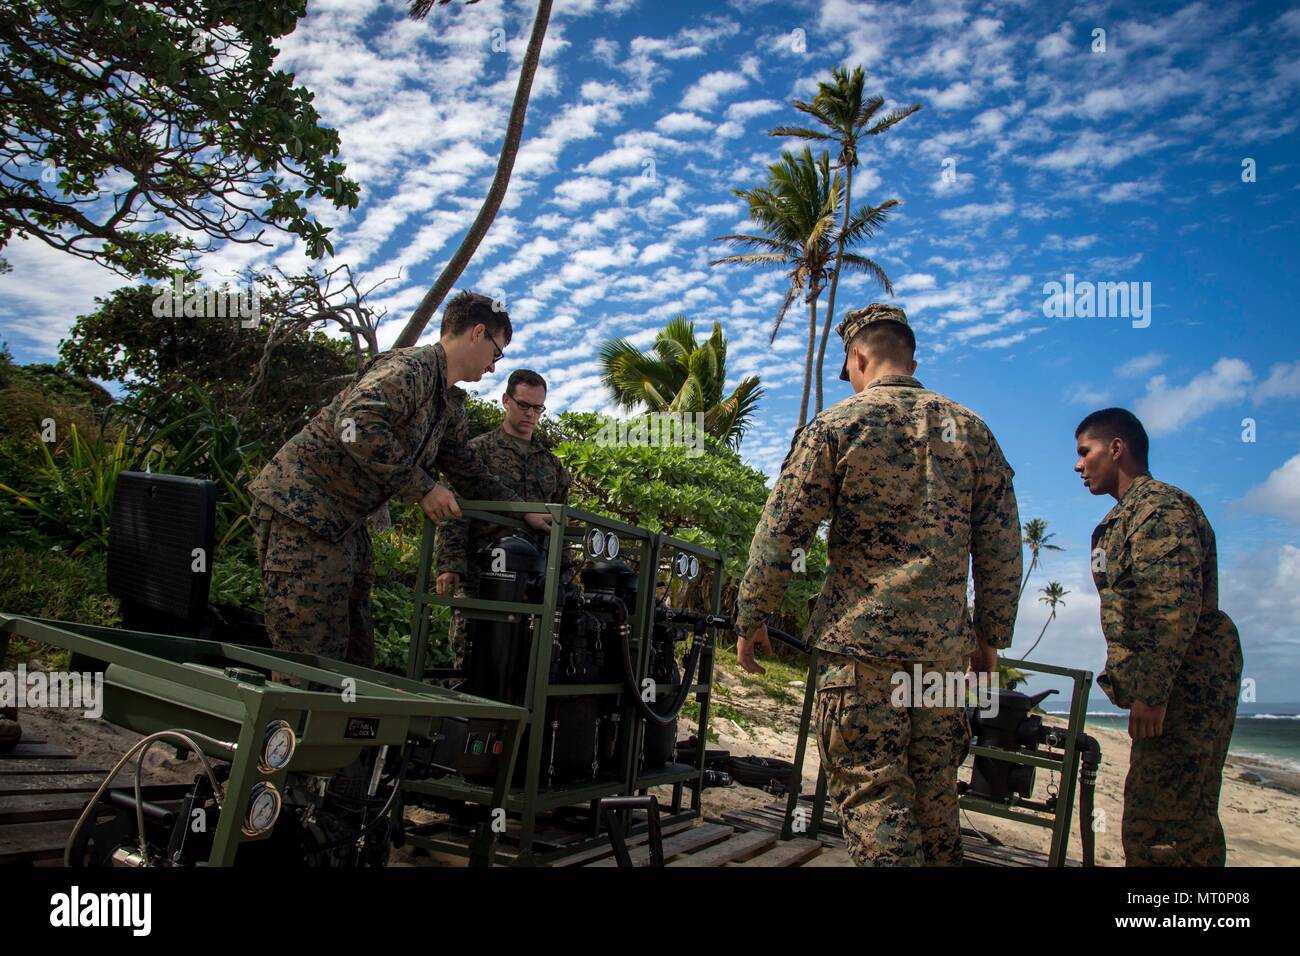 U.S. Marines with Task Force Koa Moana 17 set up a Light Weight Water Purification System on a beach on Tongatapu Island, Tonga during Exercise TAFAKULA July 17, 2017. Exercise TAFAKULA is designed to strengthen the military-to-military relations, infantry and combat training between Tonga’s His Majesty’s Armed Forces, French Army of New Caledonia, New Zealand Defense Force, and the United States Armed Forces.  (U.S. Marine Corps photo by MCIPAC Combat Camera Lance Cpl. Juan C. Bustos) Stock Photo